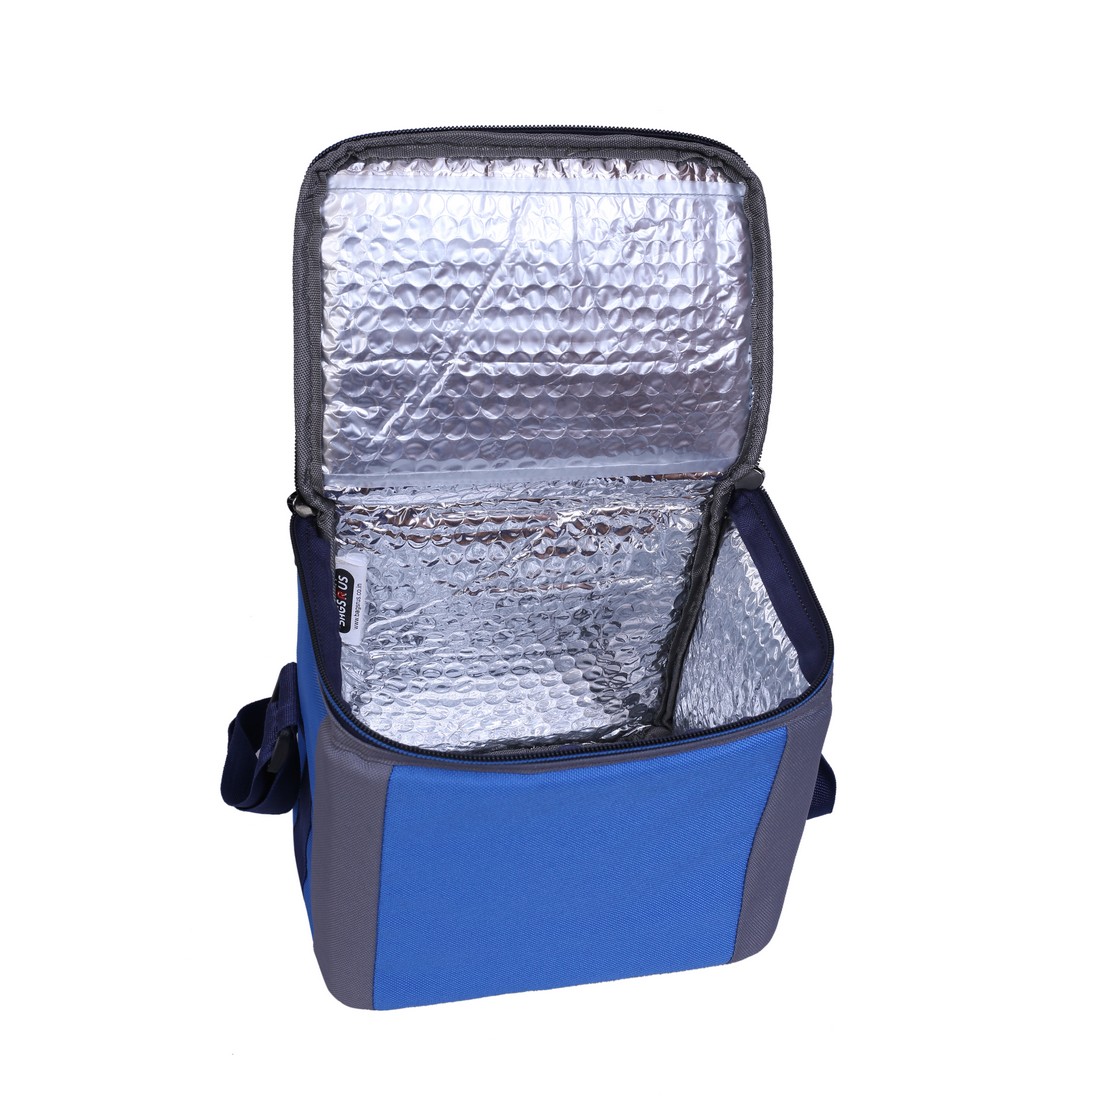 Buy BagsRUs Royal Blue 6 Liter 6 Can Insulated Portable Travel Chiller ...